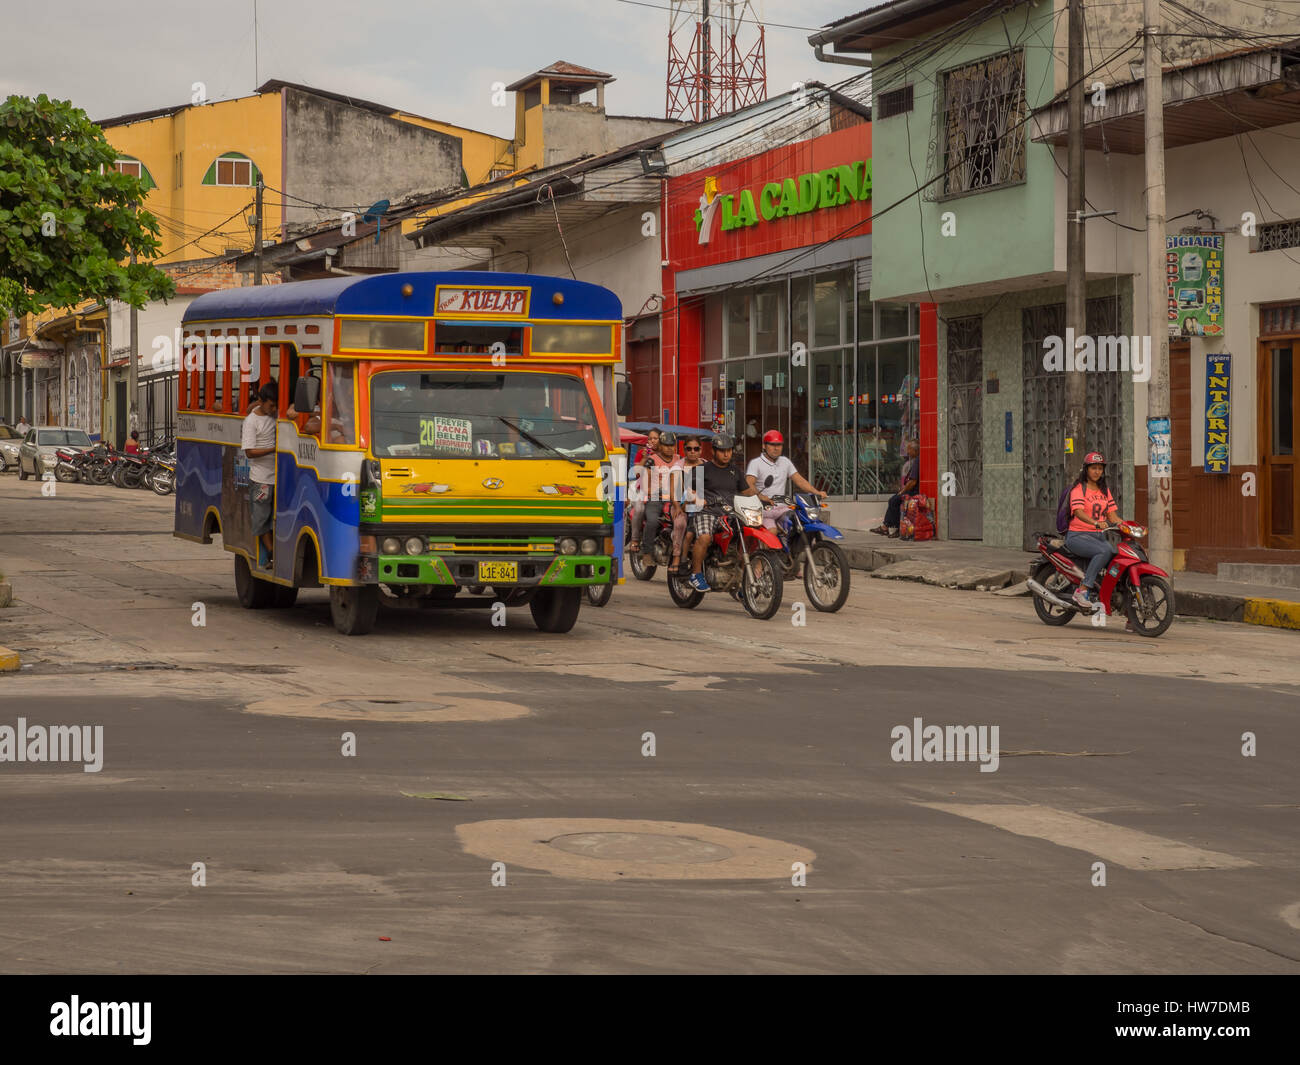 Iquitos, Peru- May 14, 2016: Corolful bus on street of a small southern town. Stock Photo